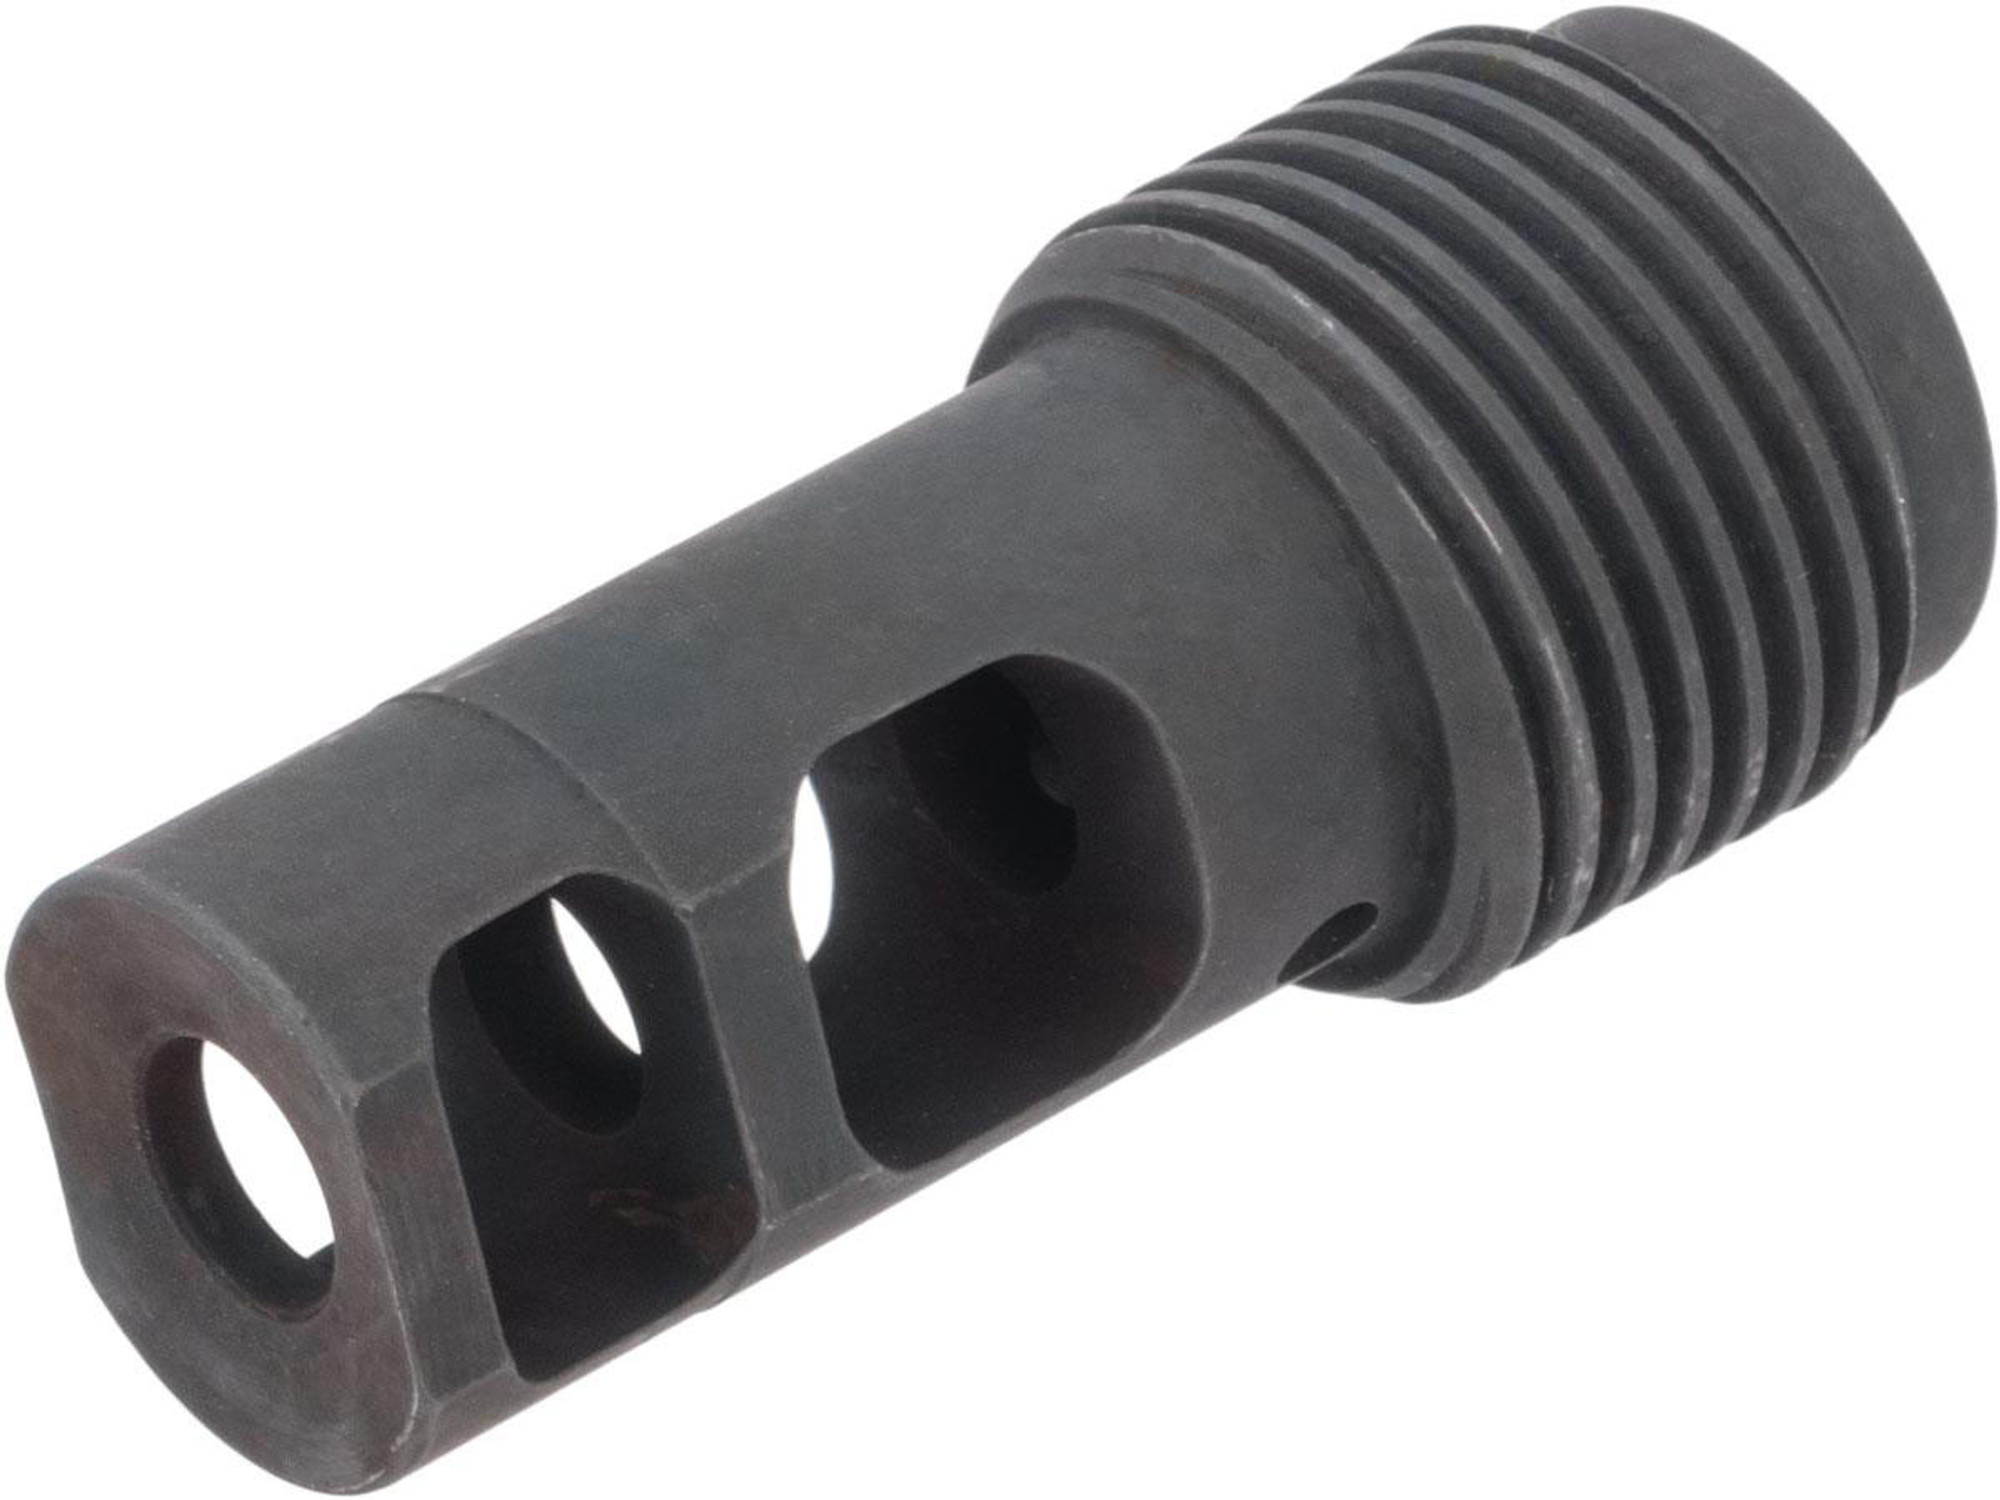 EMG / SAI GRY 14mm Positive Flashhider for Airsoft AEGs